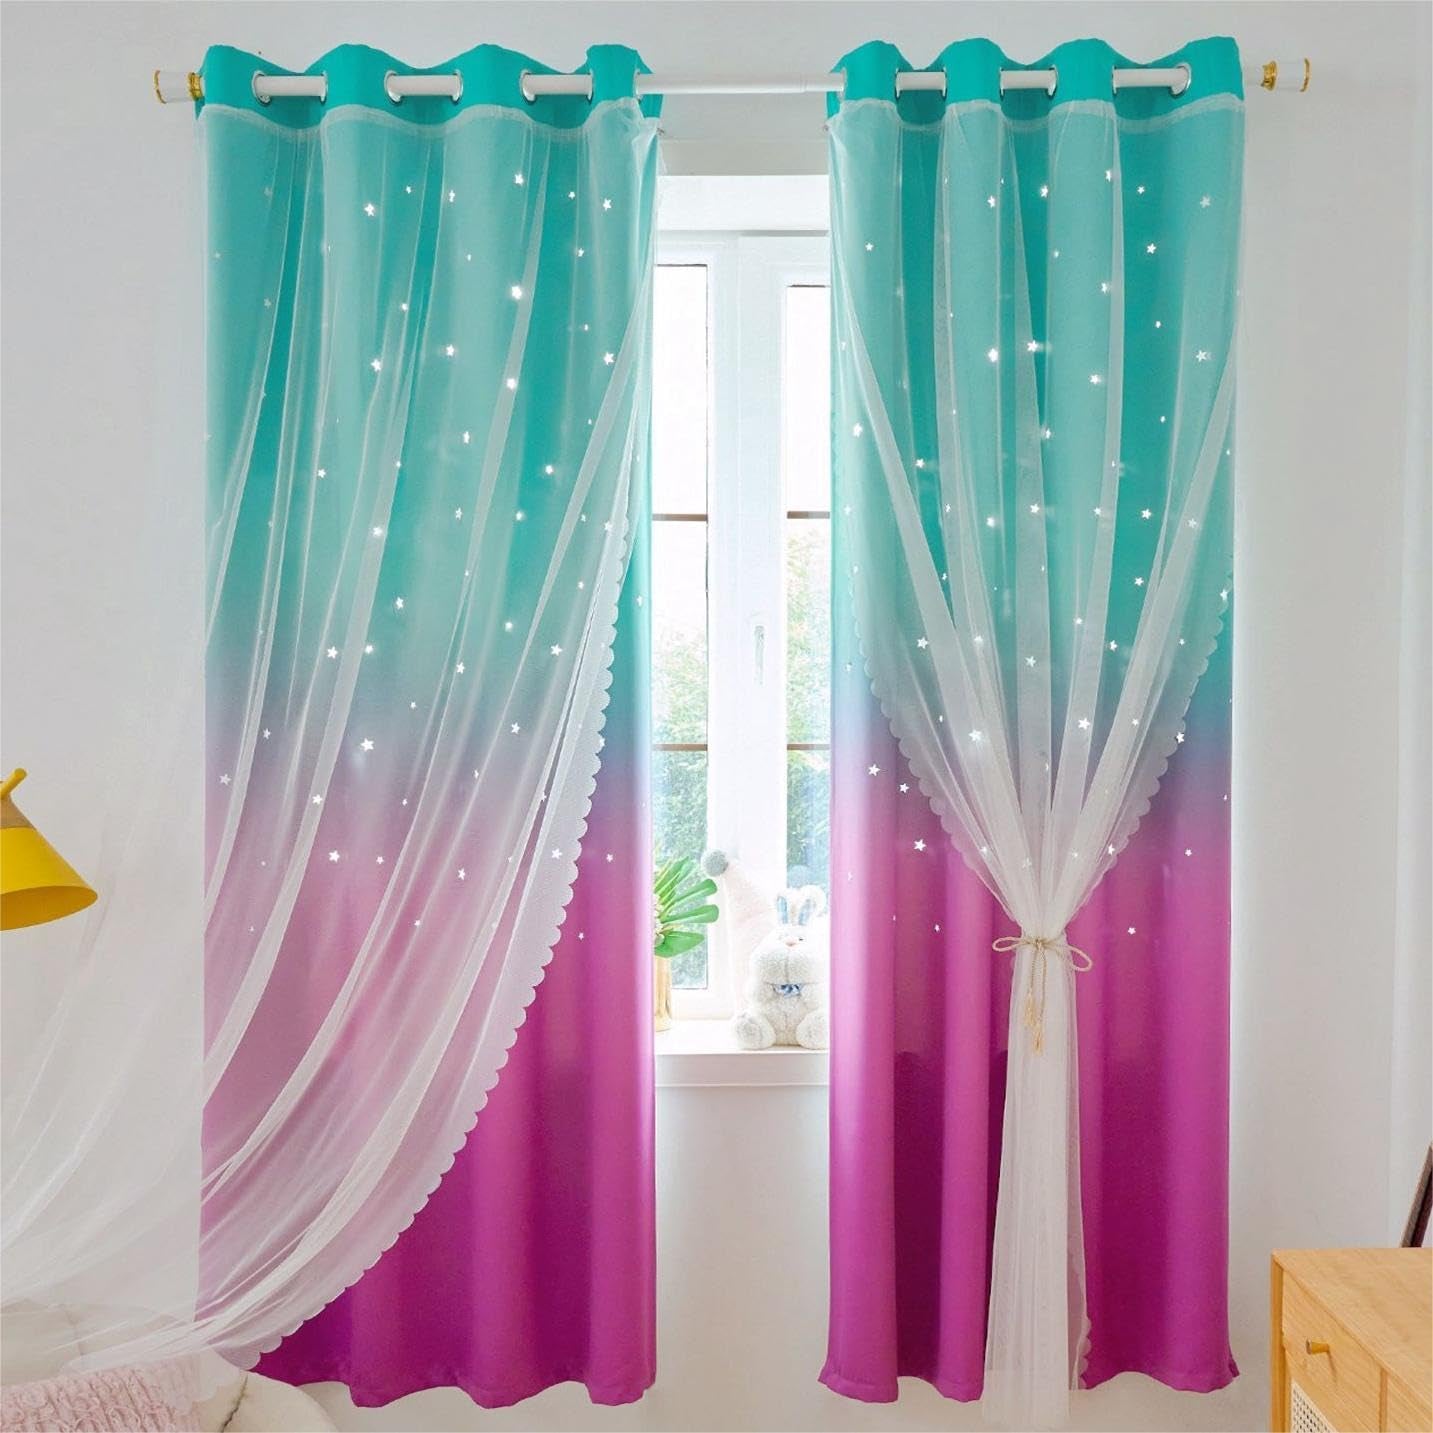 Anjee Rainbow Curtains for Girls Bedroom Double Layer Blackout Curtains Grommets Top Star Cutout Ombre Window Drapes with Sheer for Living Room 2 Panels in 52 X 84 Inch Length, Pink and Yellow  Anjee Teal Purple W52" X L95" 